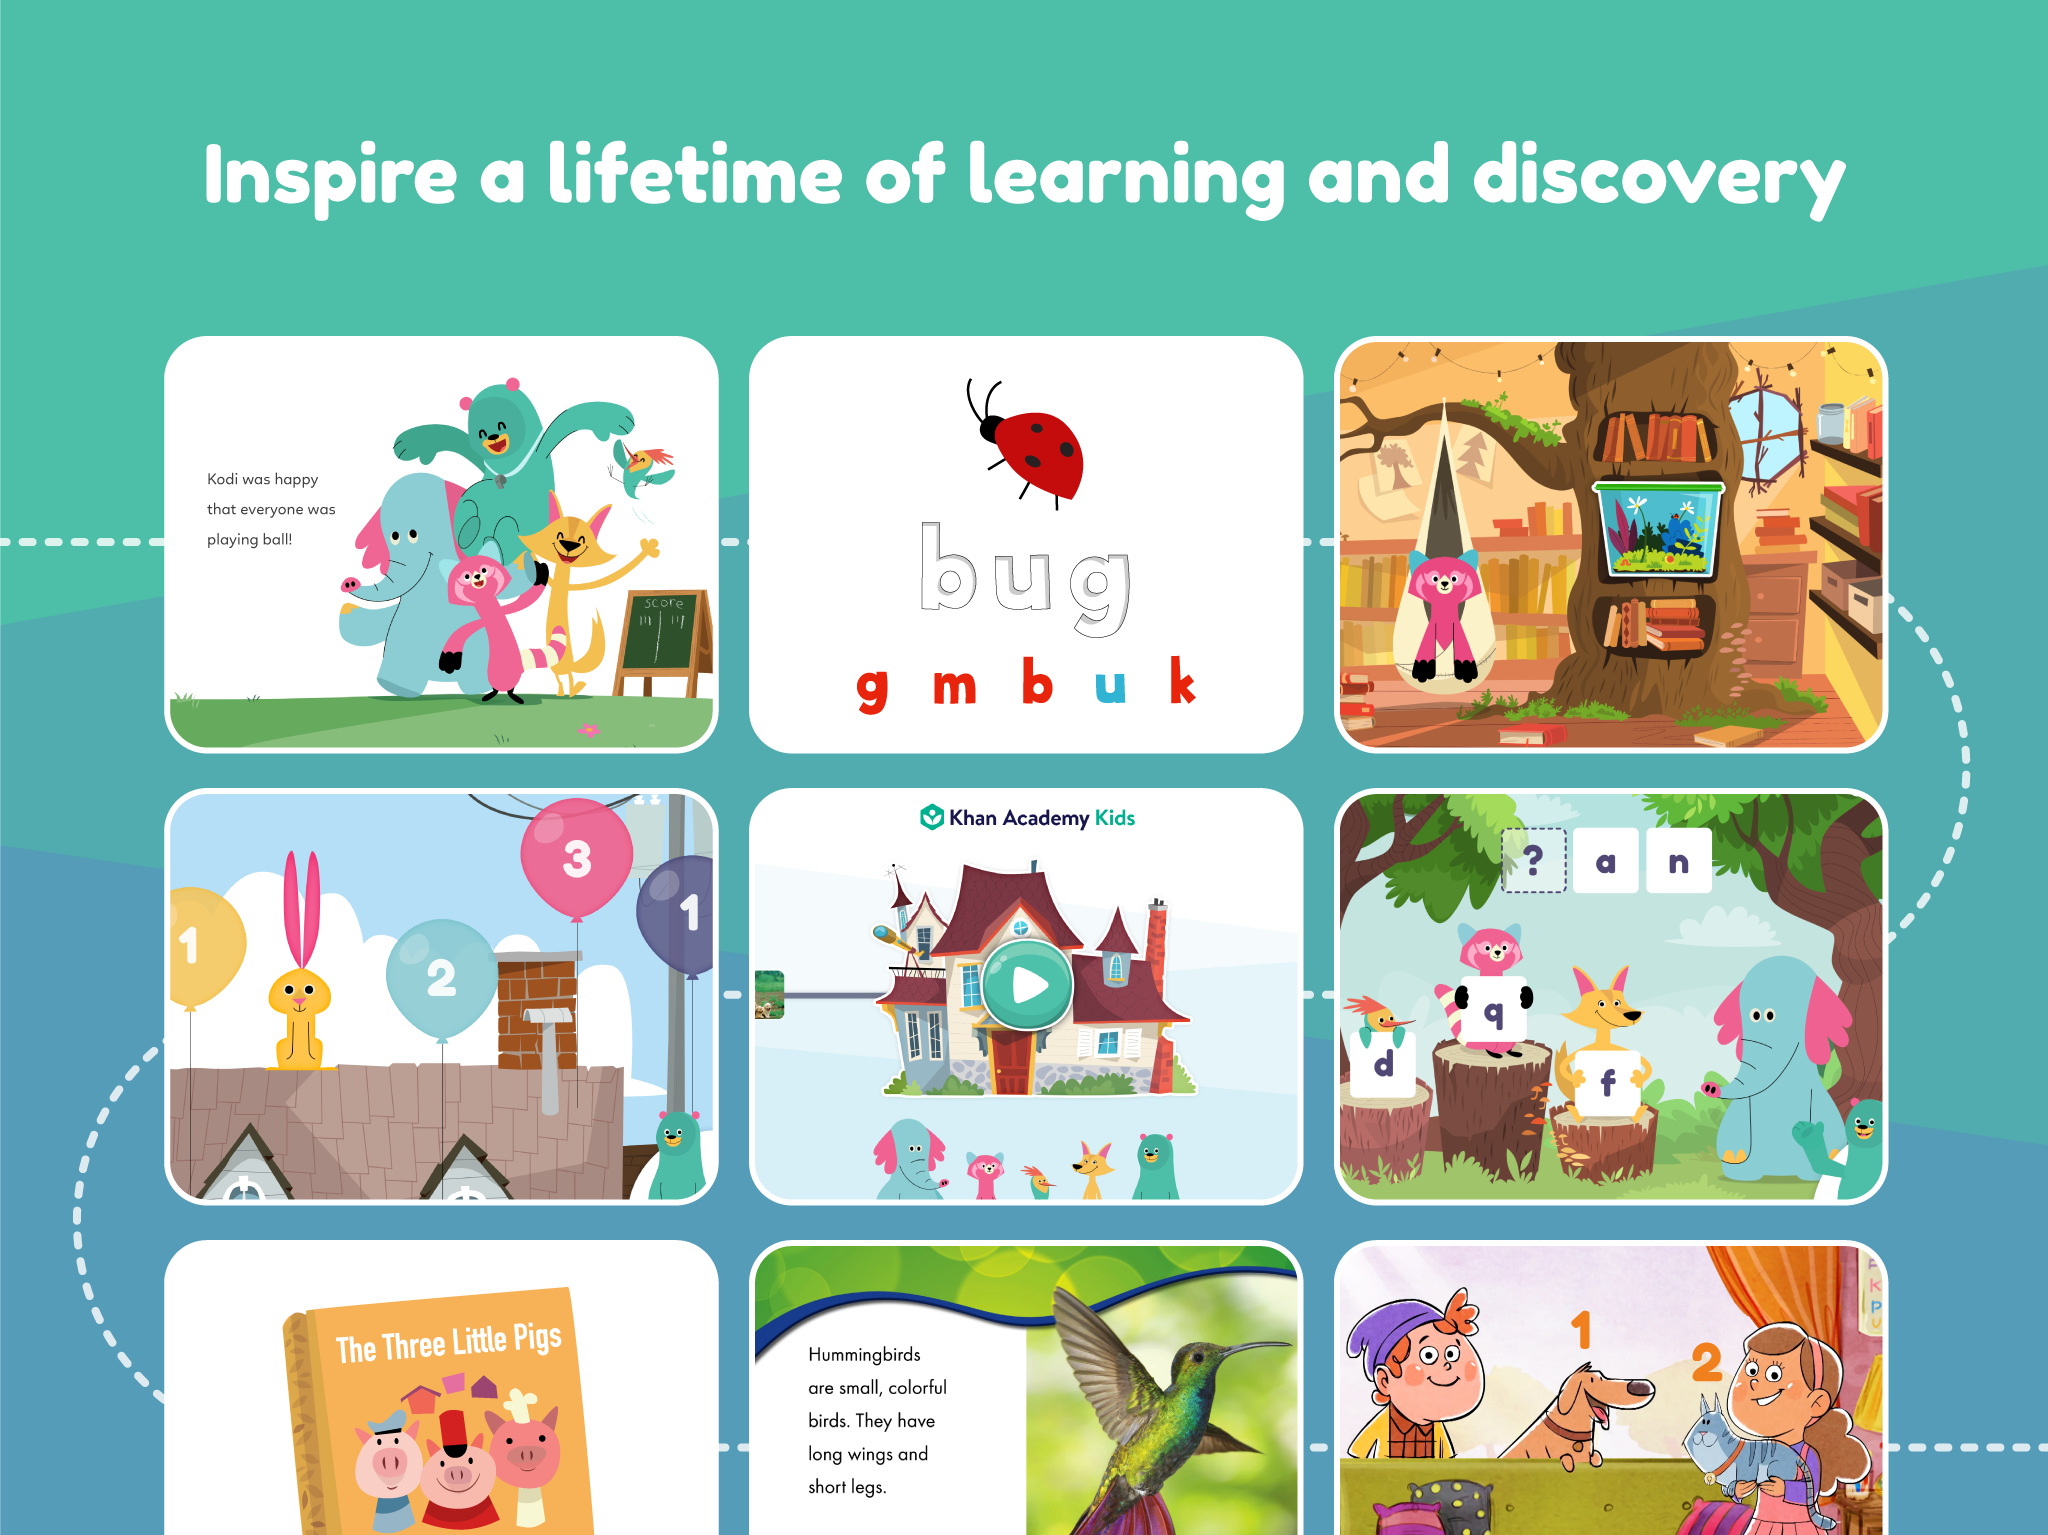 Khan Academy Kids Launches Today! - Super Simple